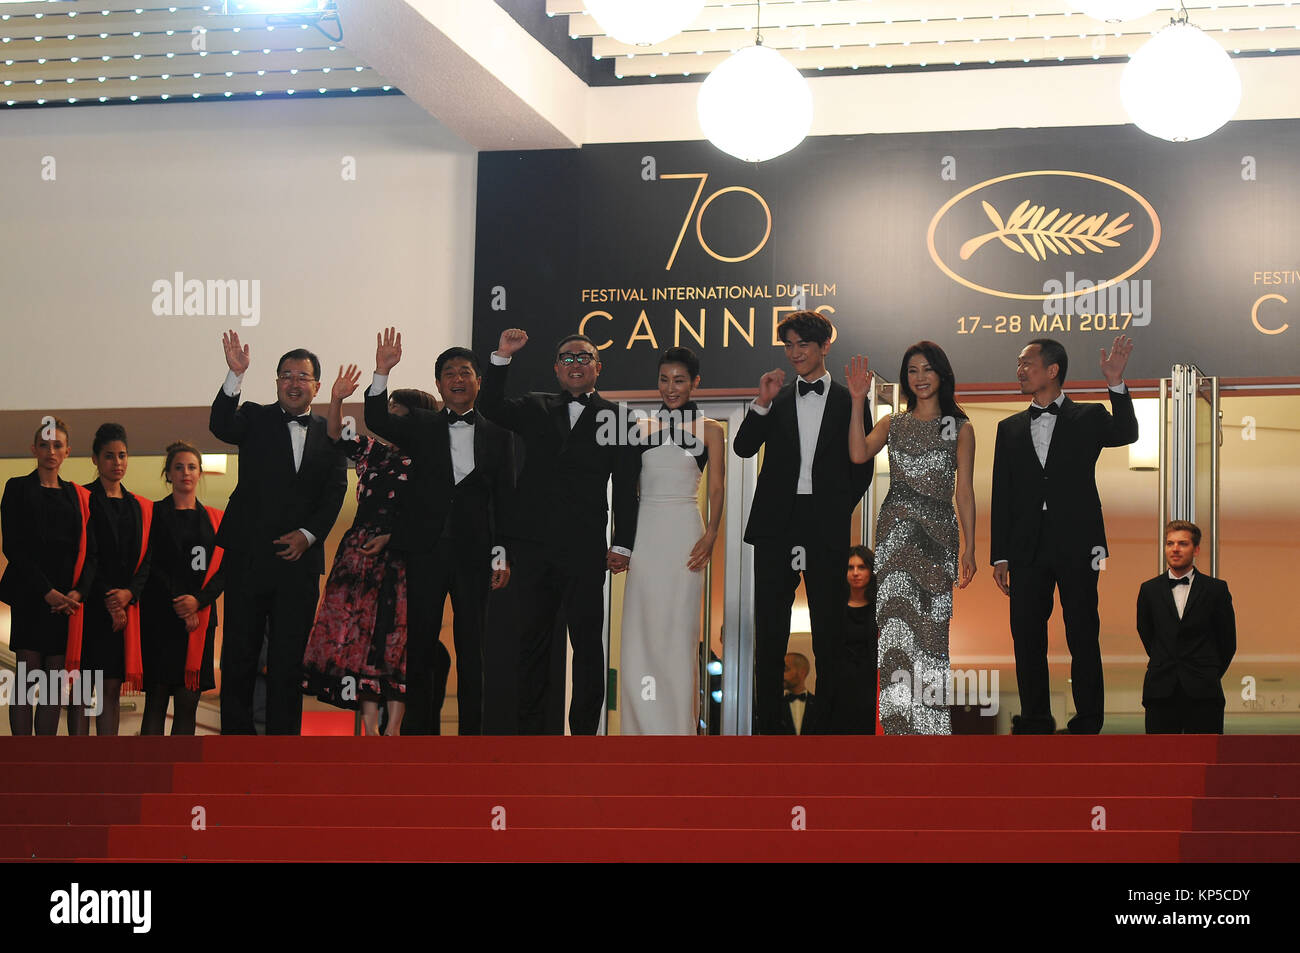 March 22nd, 2017 - Cannes  Ak-Nyeo red carpet during the 70th Cannes Film Festival 2017 Stock Photo